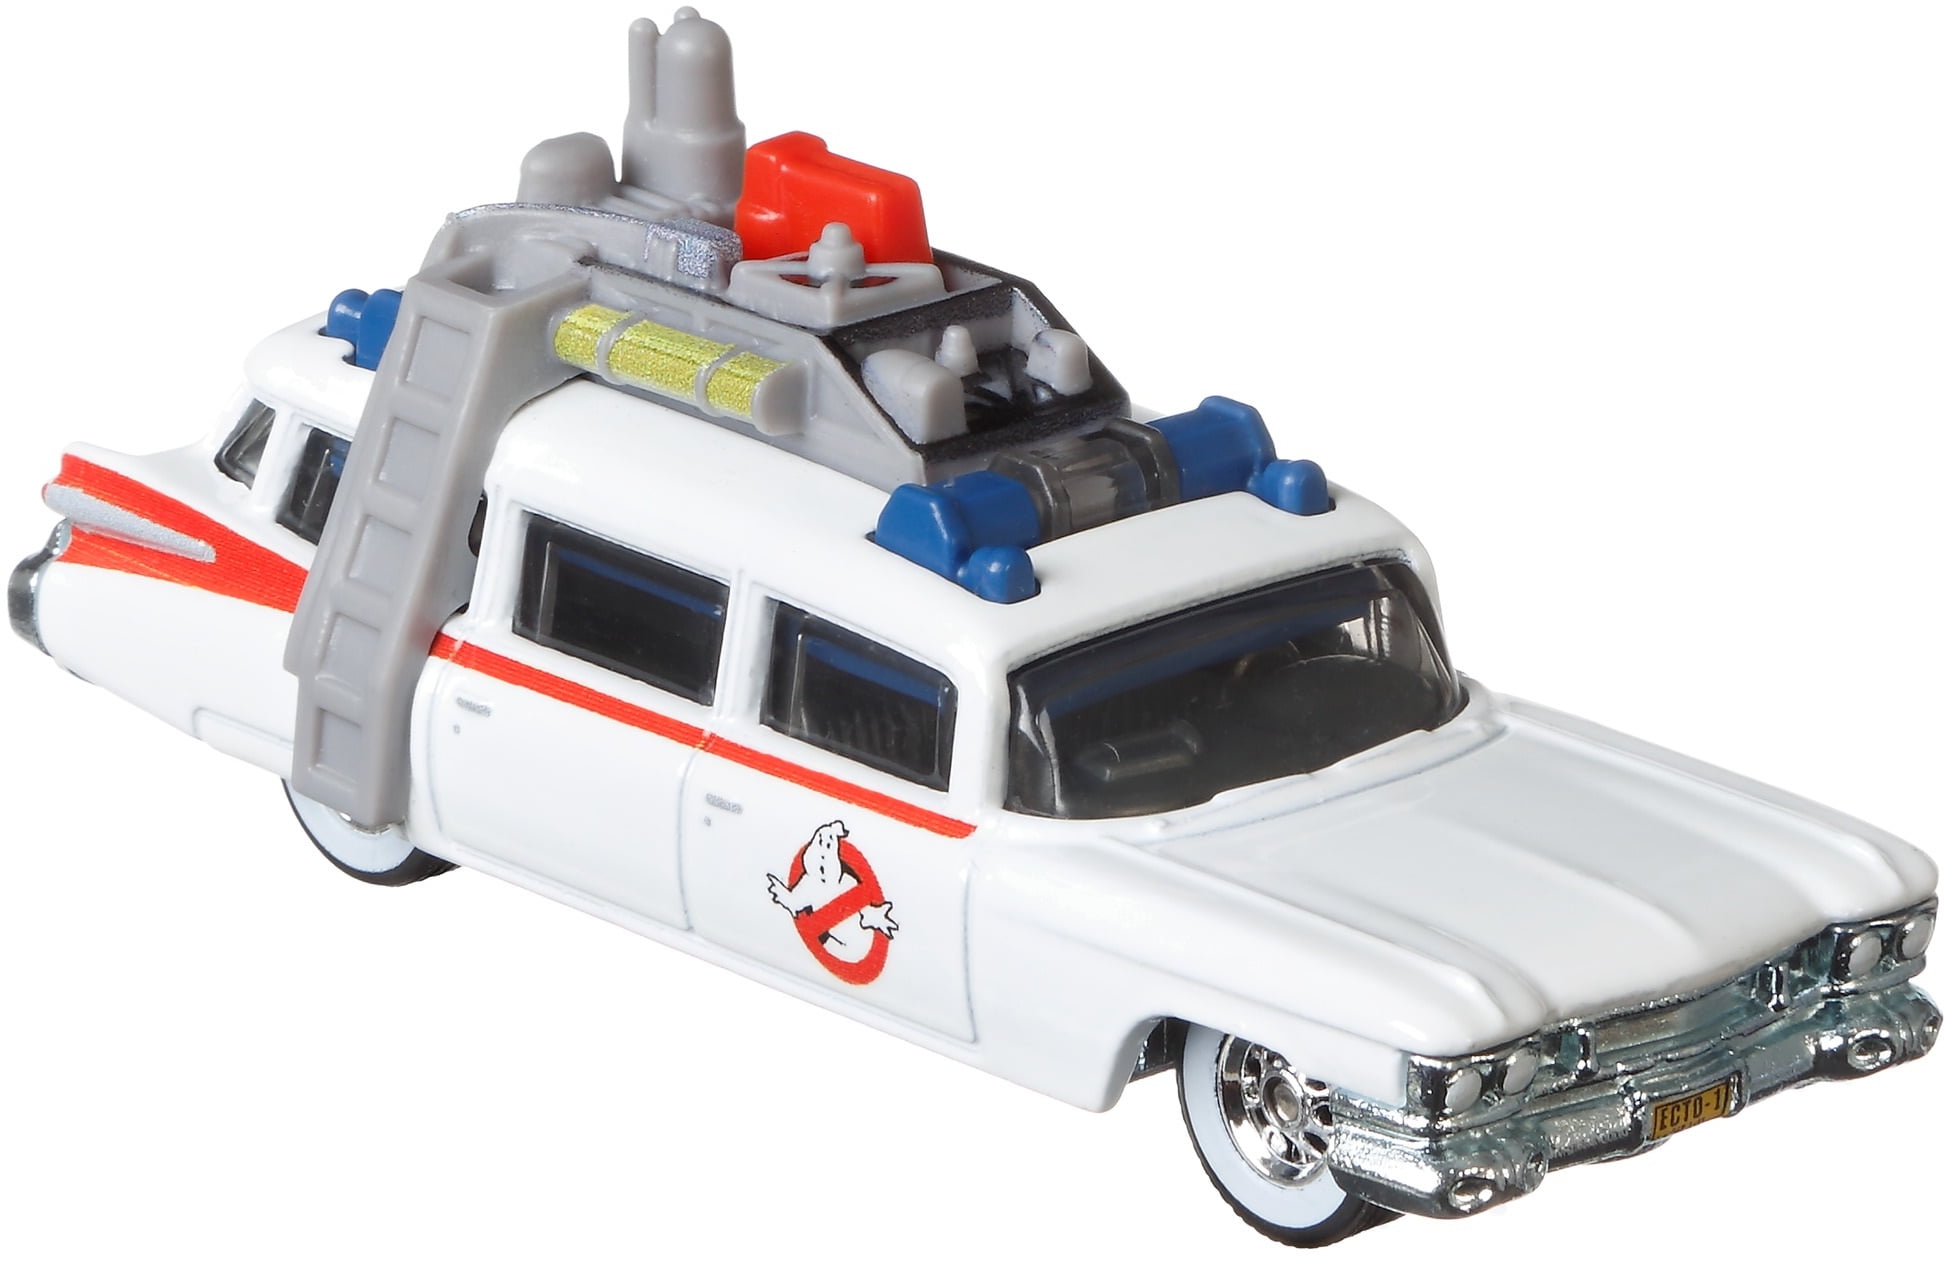 Hot Wheels Ecto-1 2020 1:64 Ghostbusters Car GJR39 for sale online 